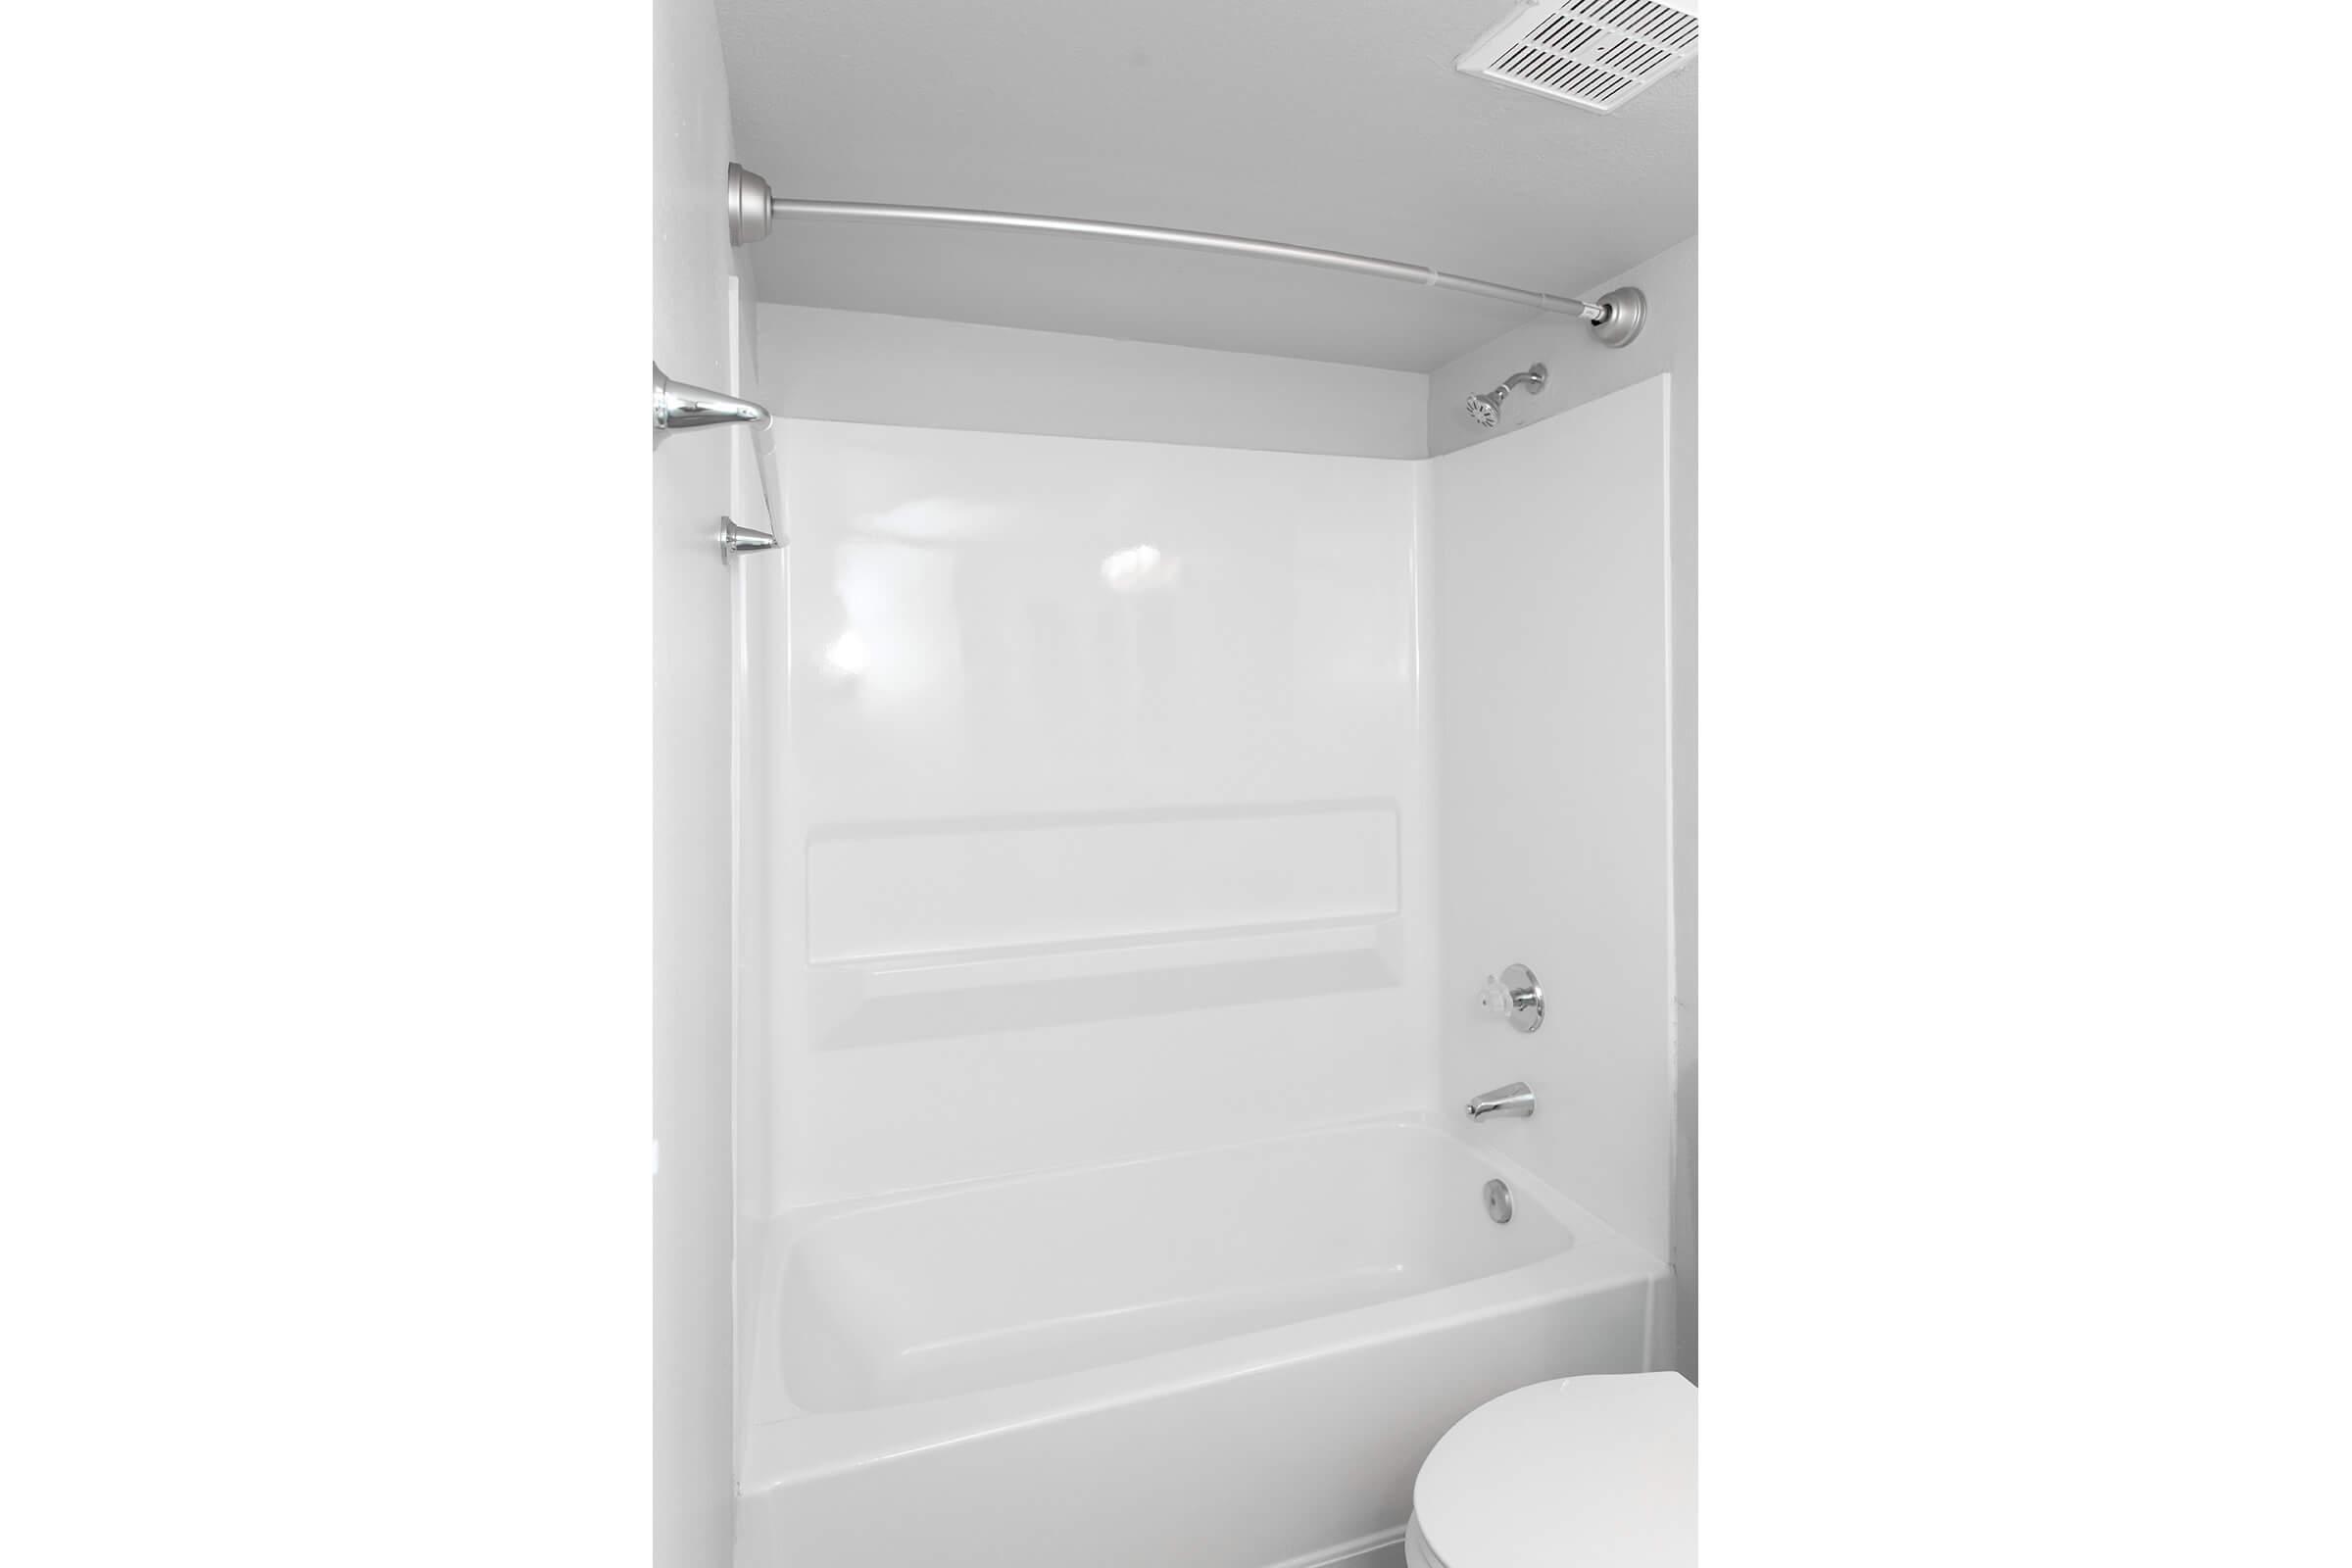 Large clean and modern shower and tub